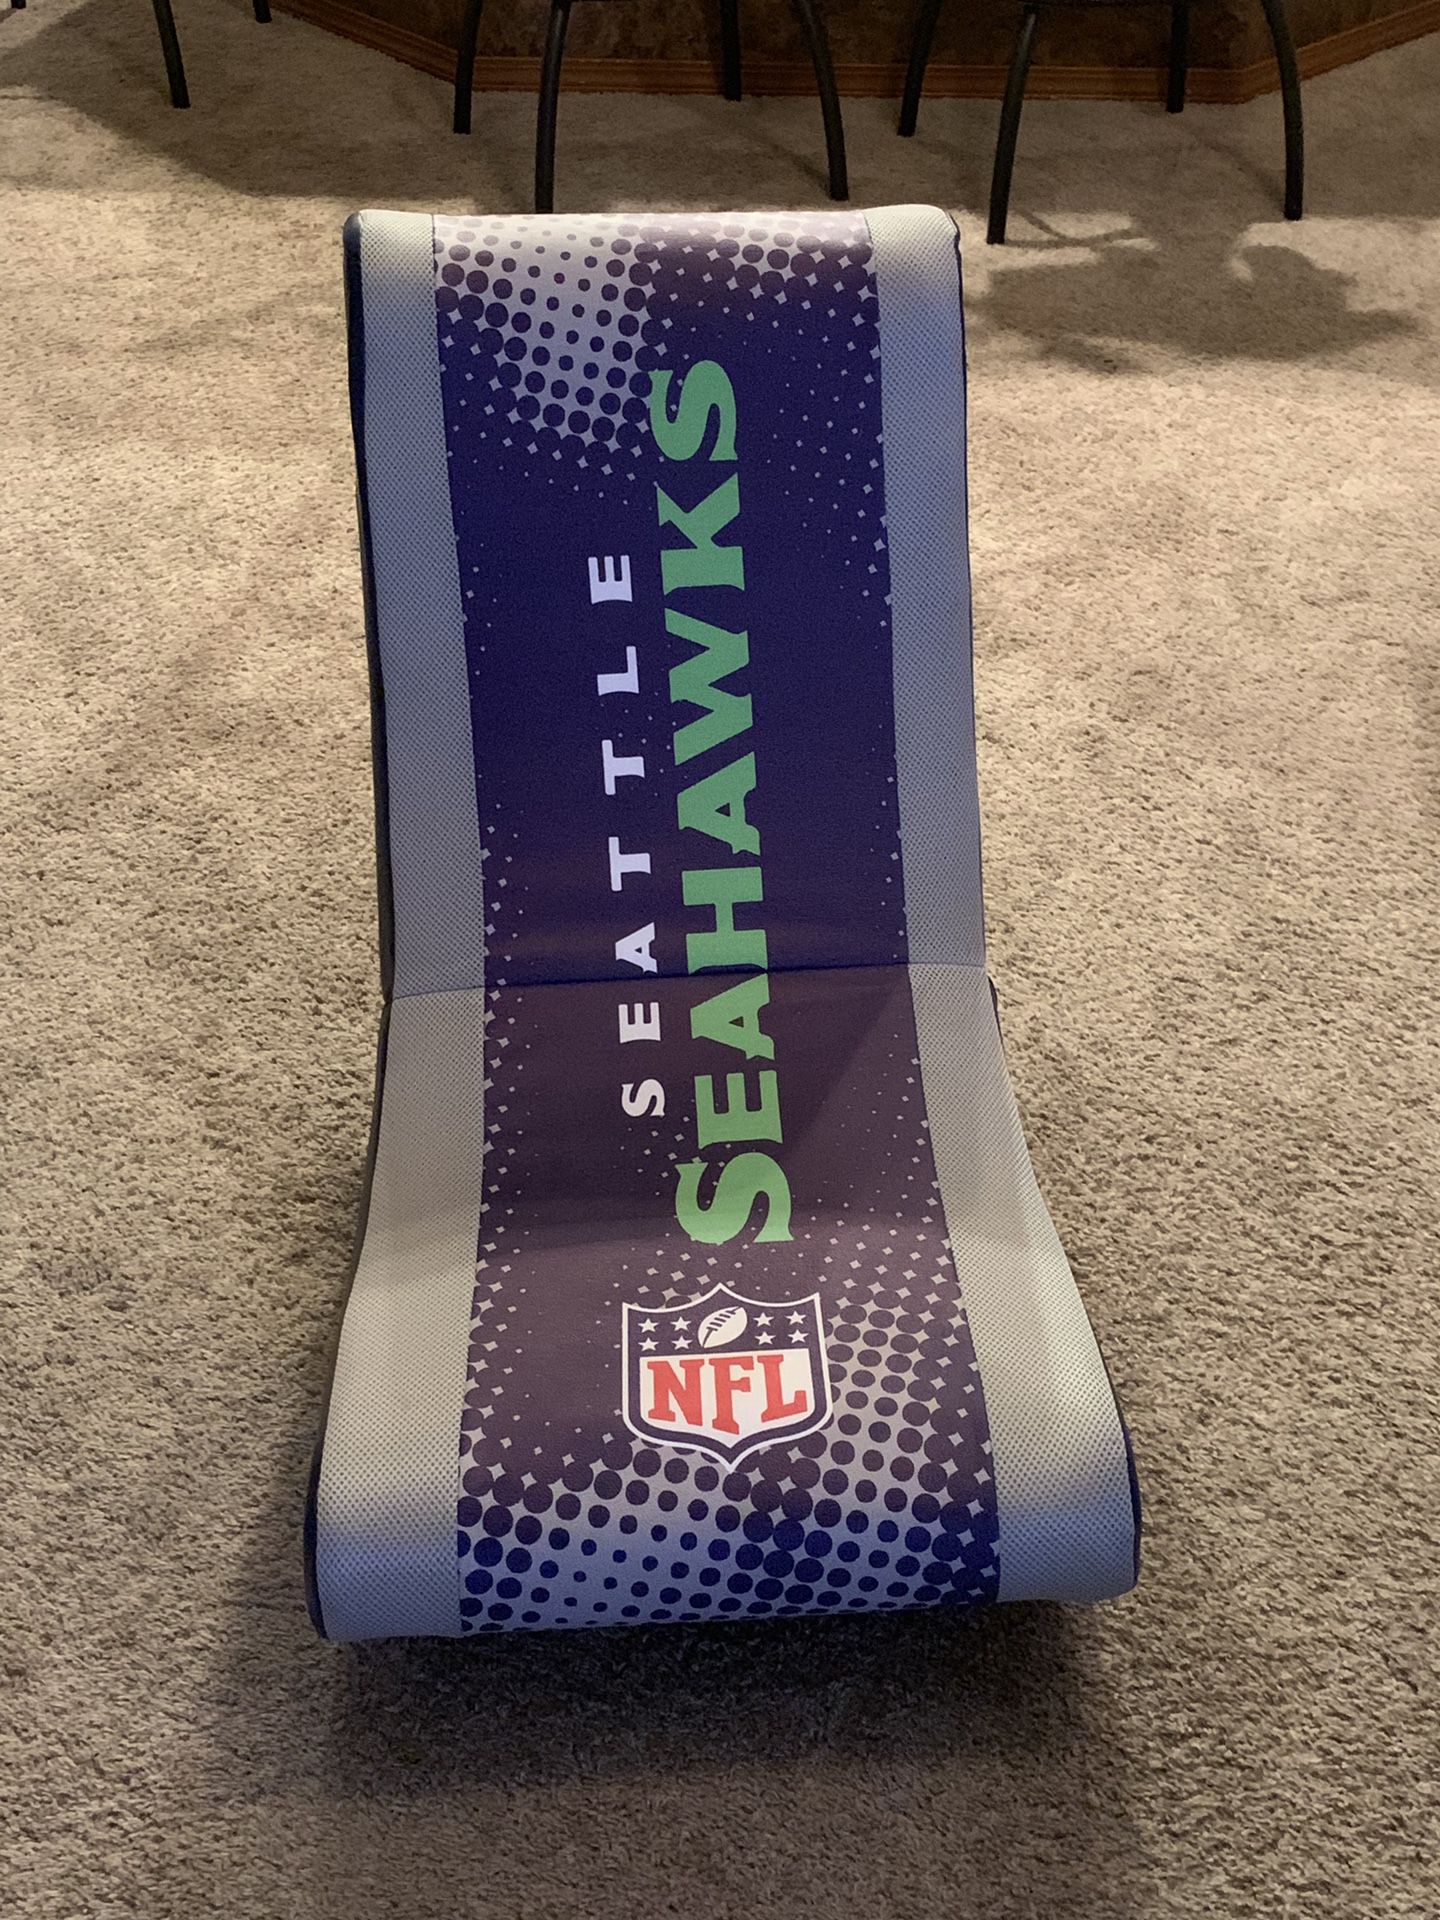 Limited addition Seahawk gaming chair.